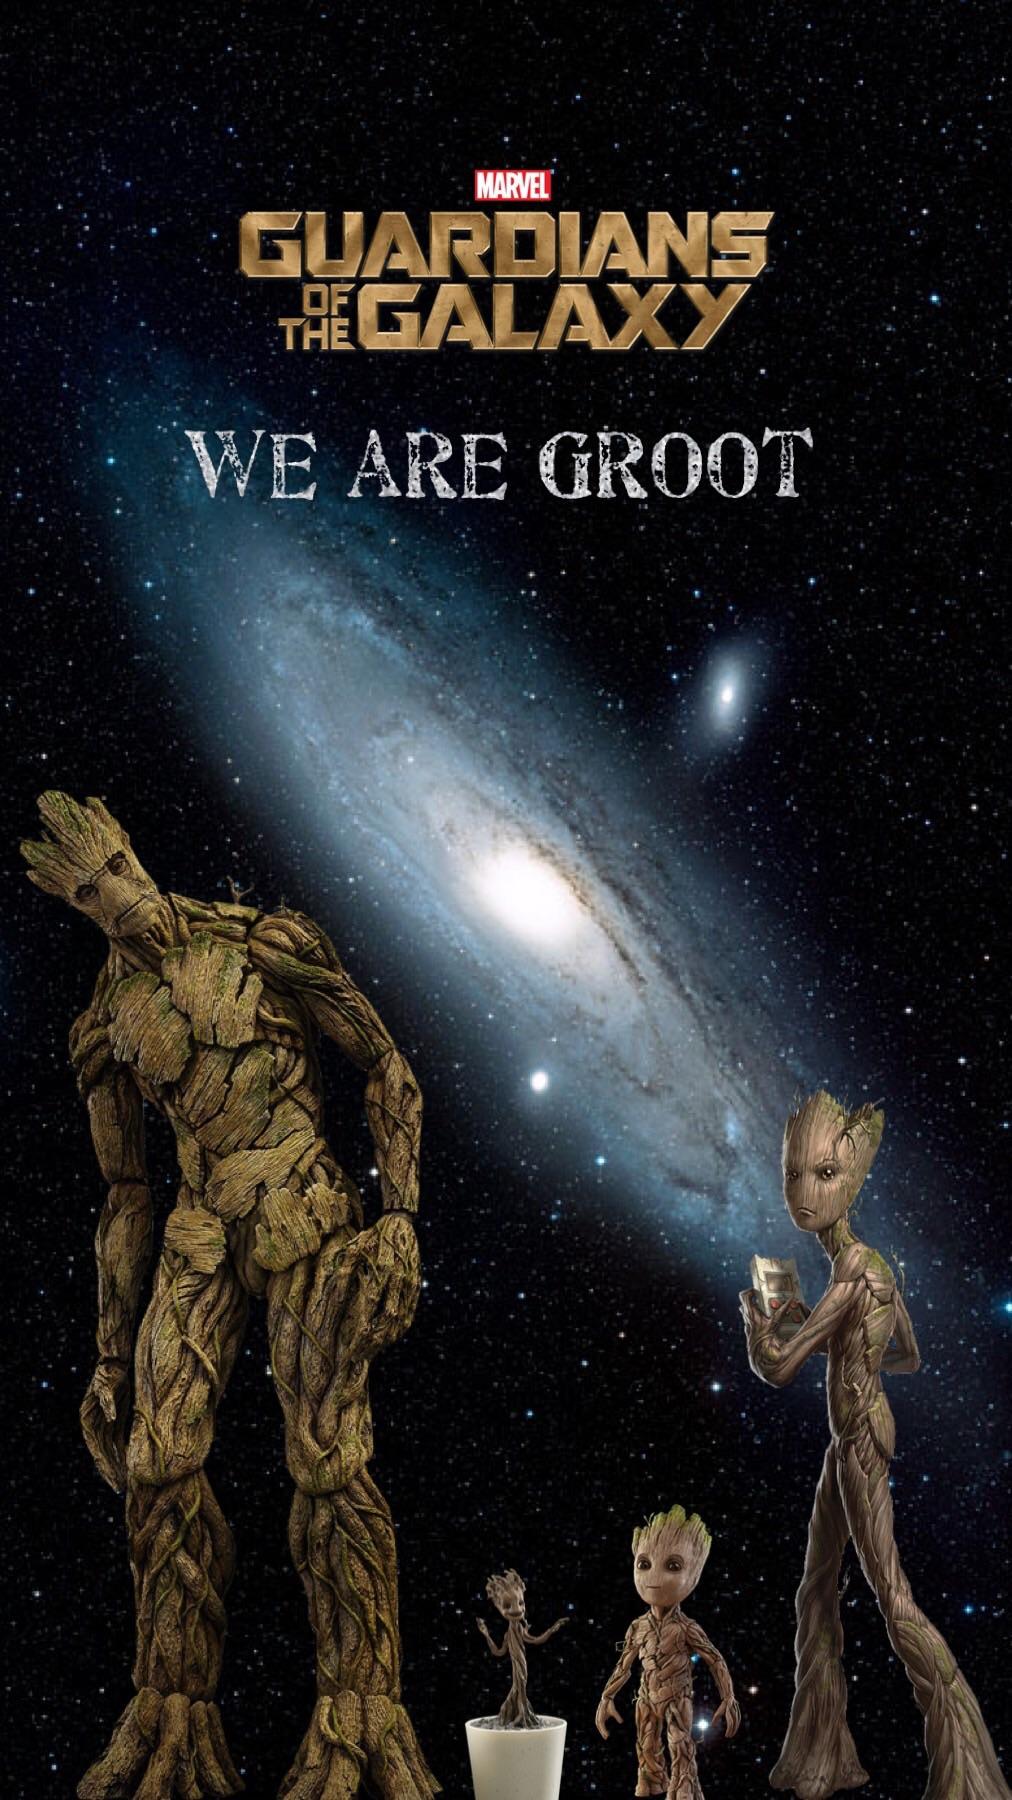 Evolution of Groot Phone Wallpaper i've be working on for a while. What do you think?